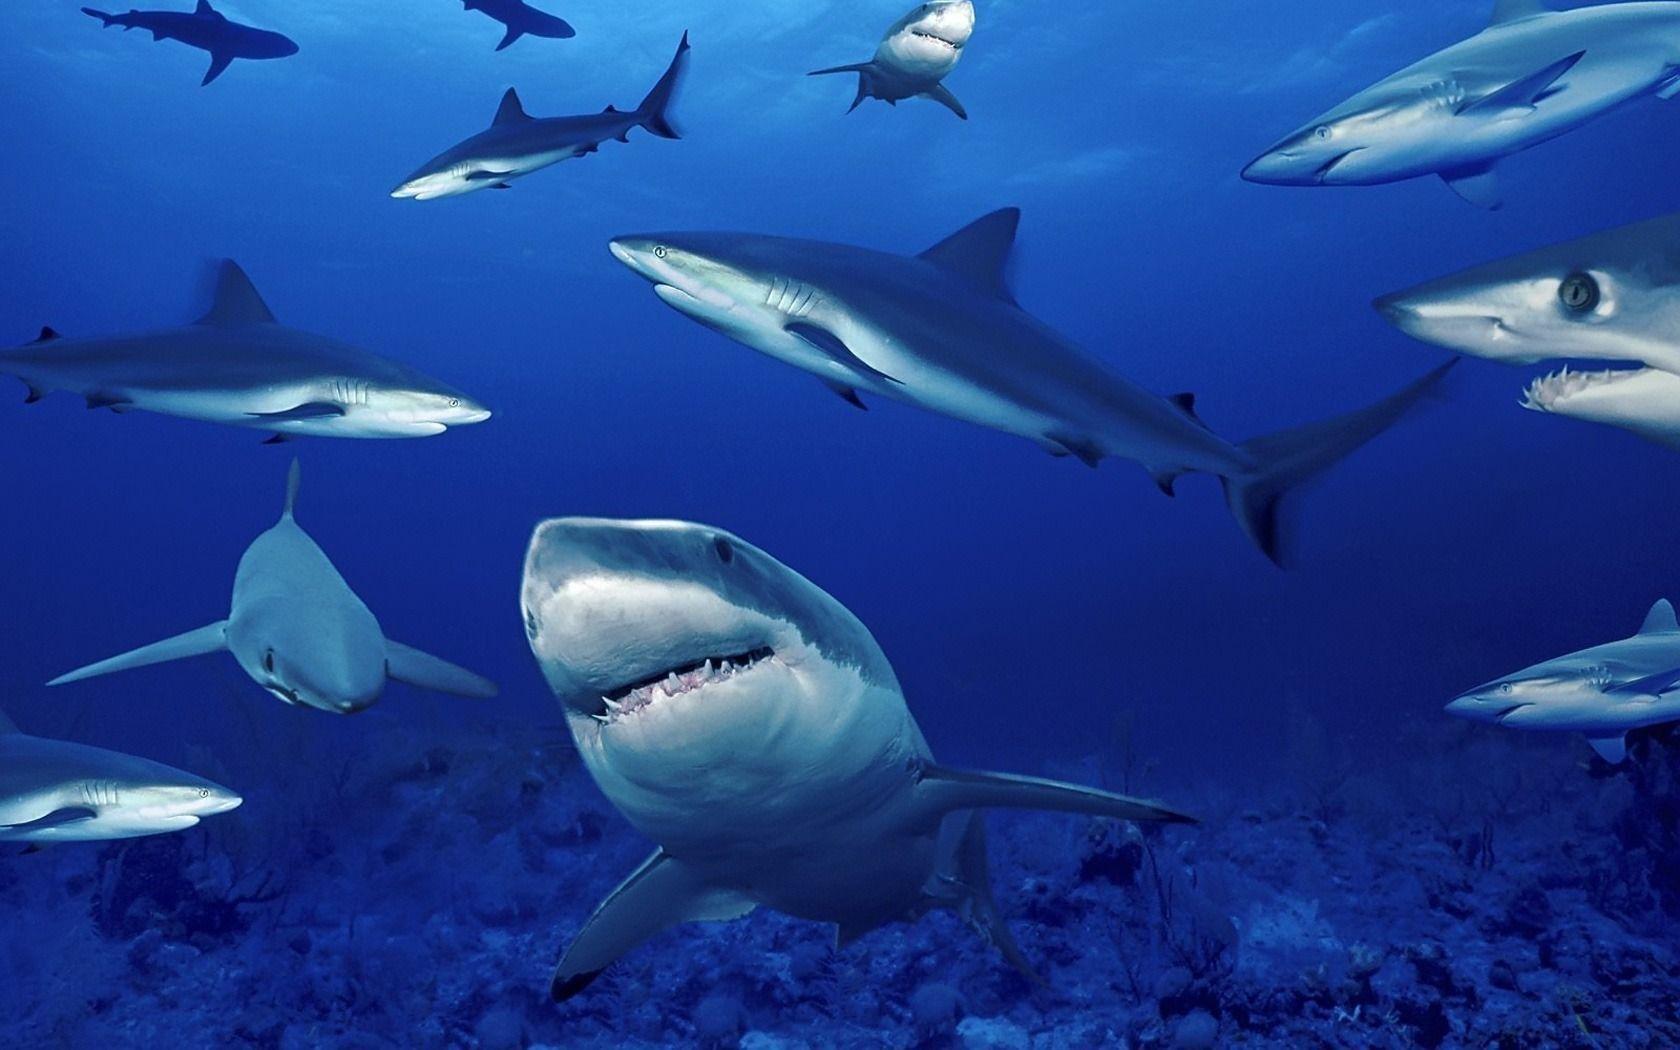 Shark HD Wallpaper Image Picture Photo Download